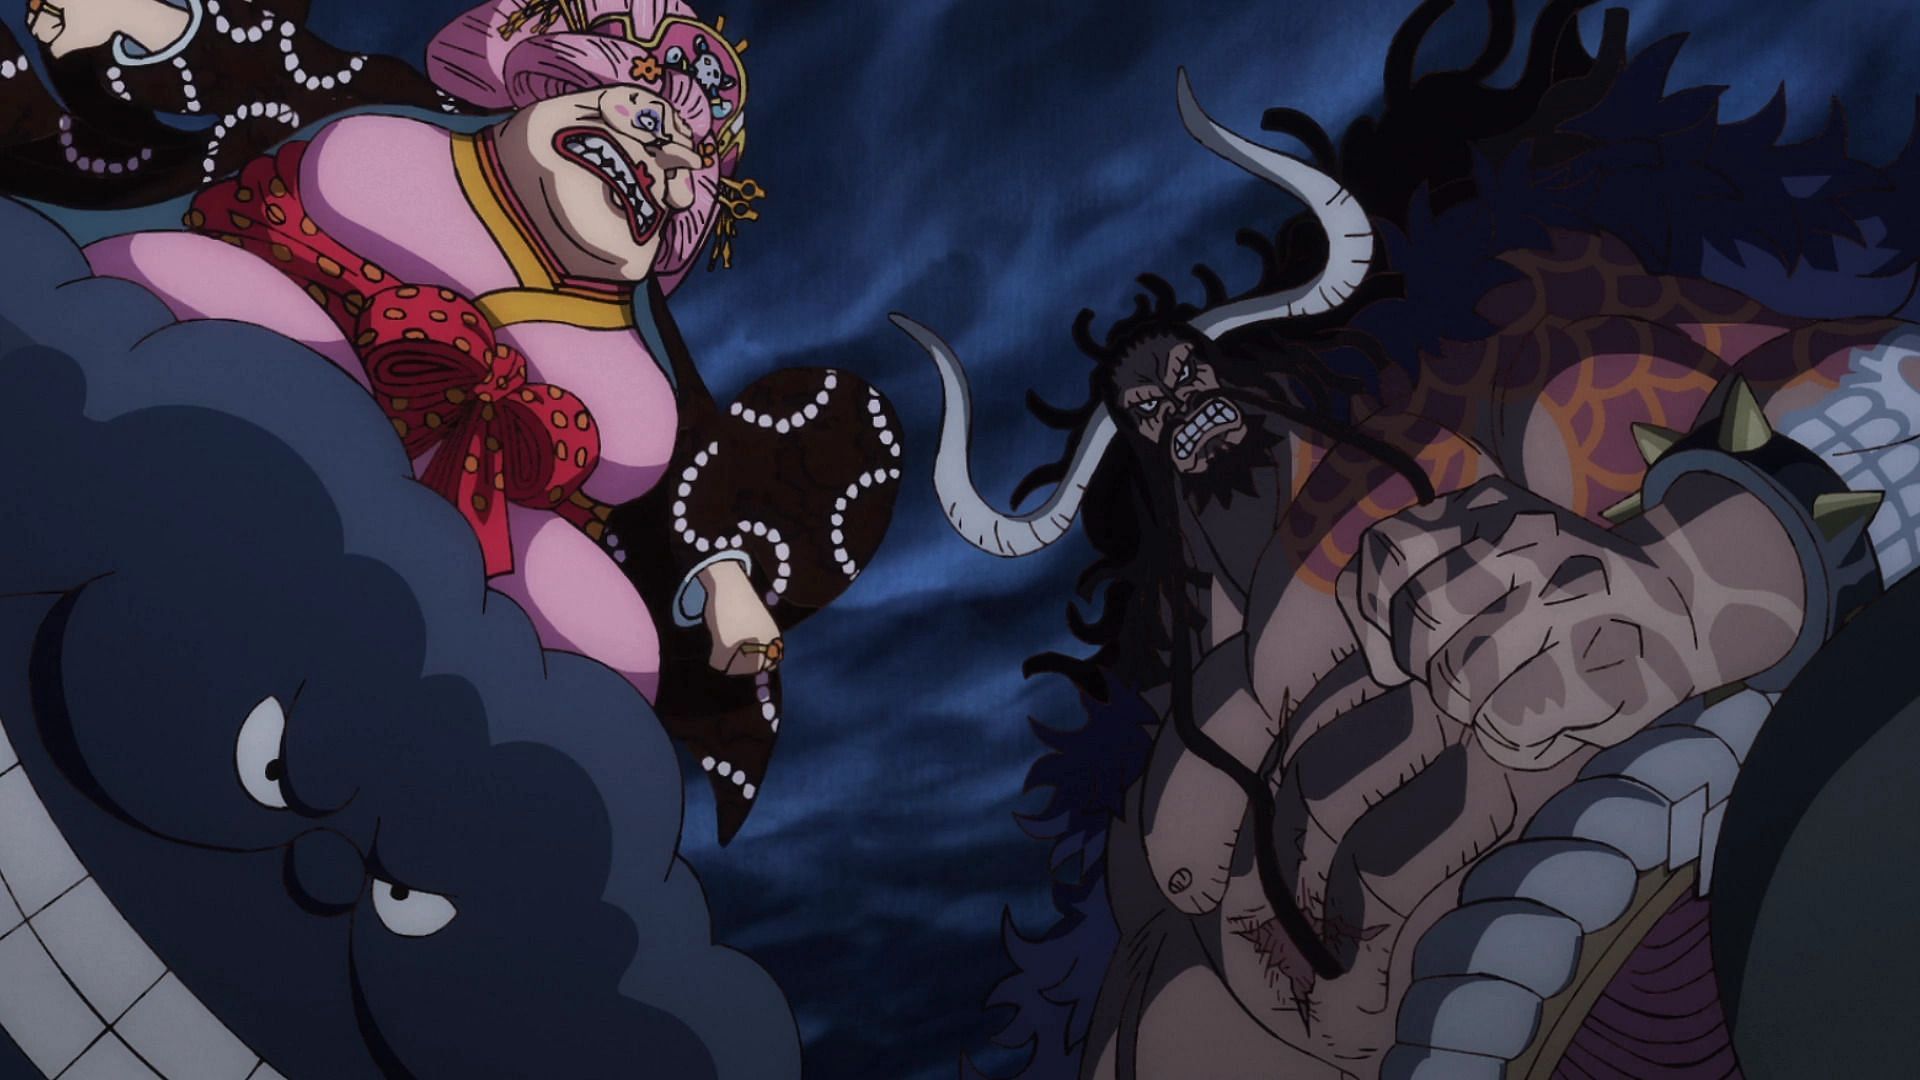 One Piece episode 1026 English sub Kaido and big mom Vs Luffy , Zoro, Law,  Kid best fight., By RomRom vlog